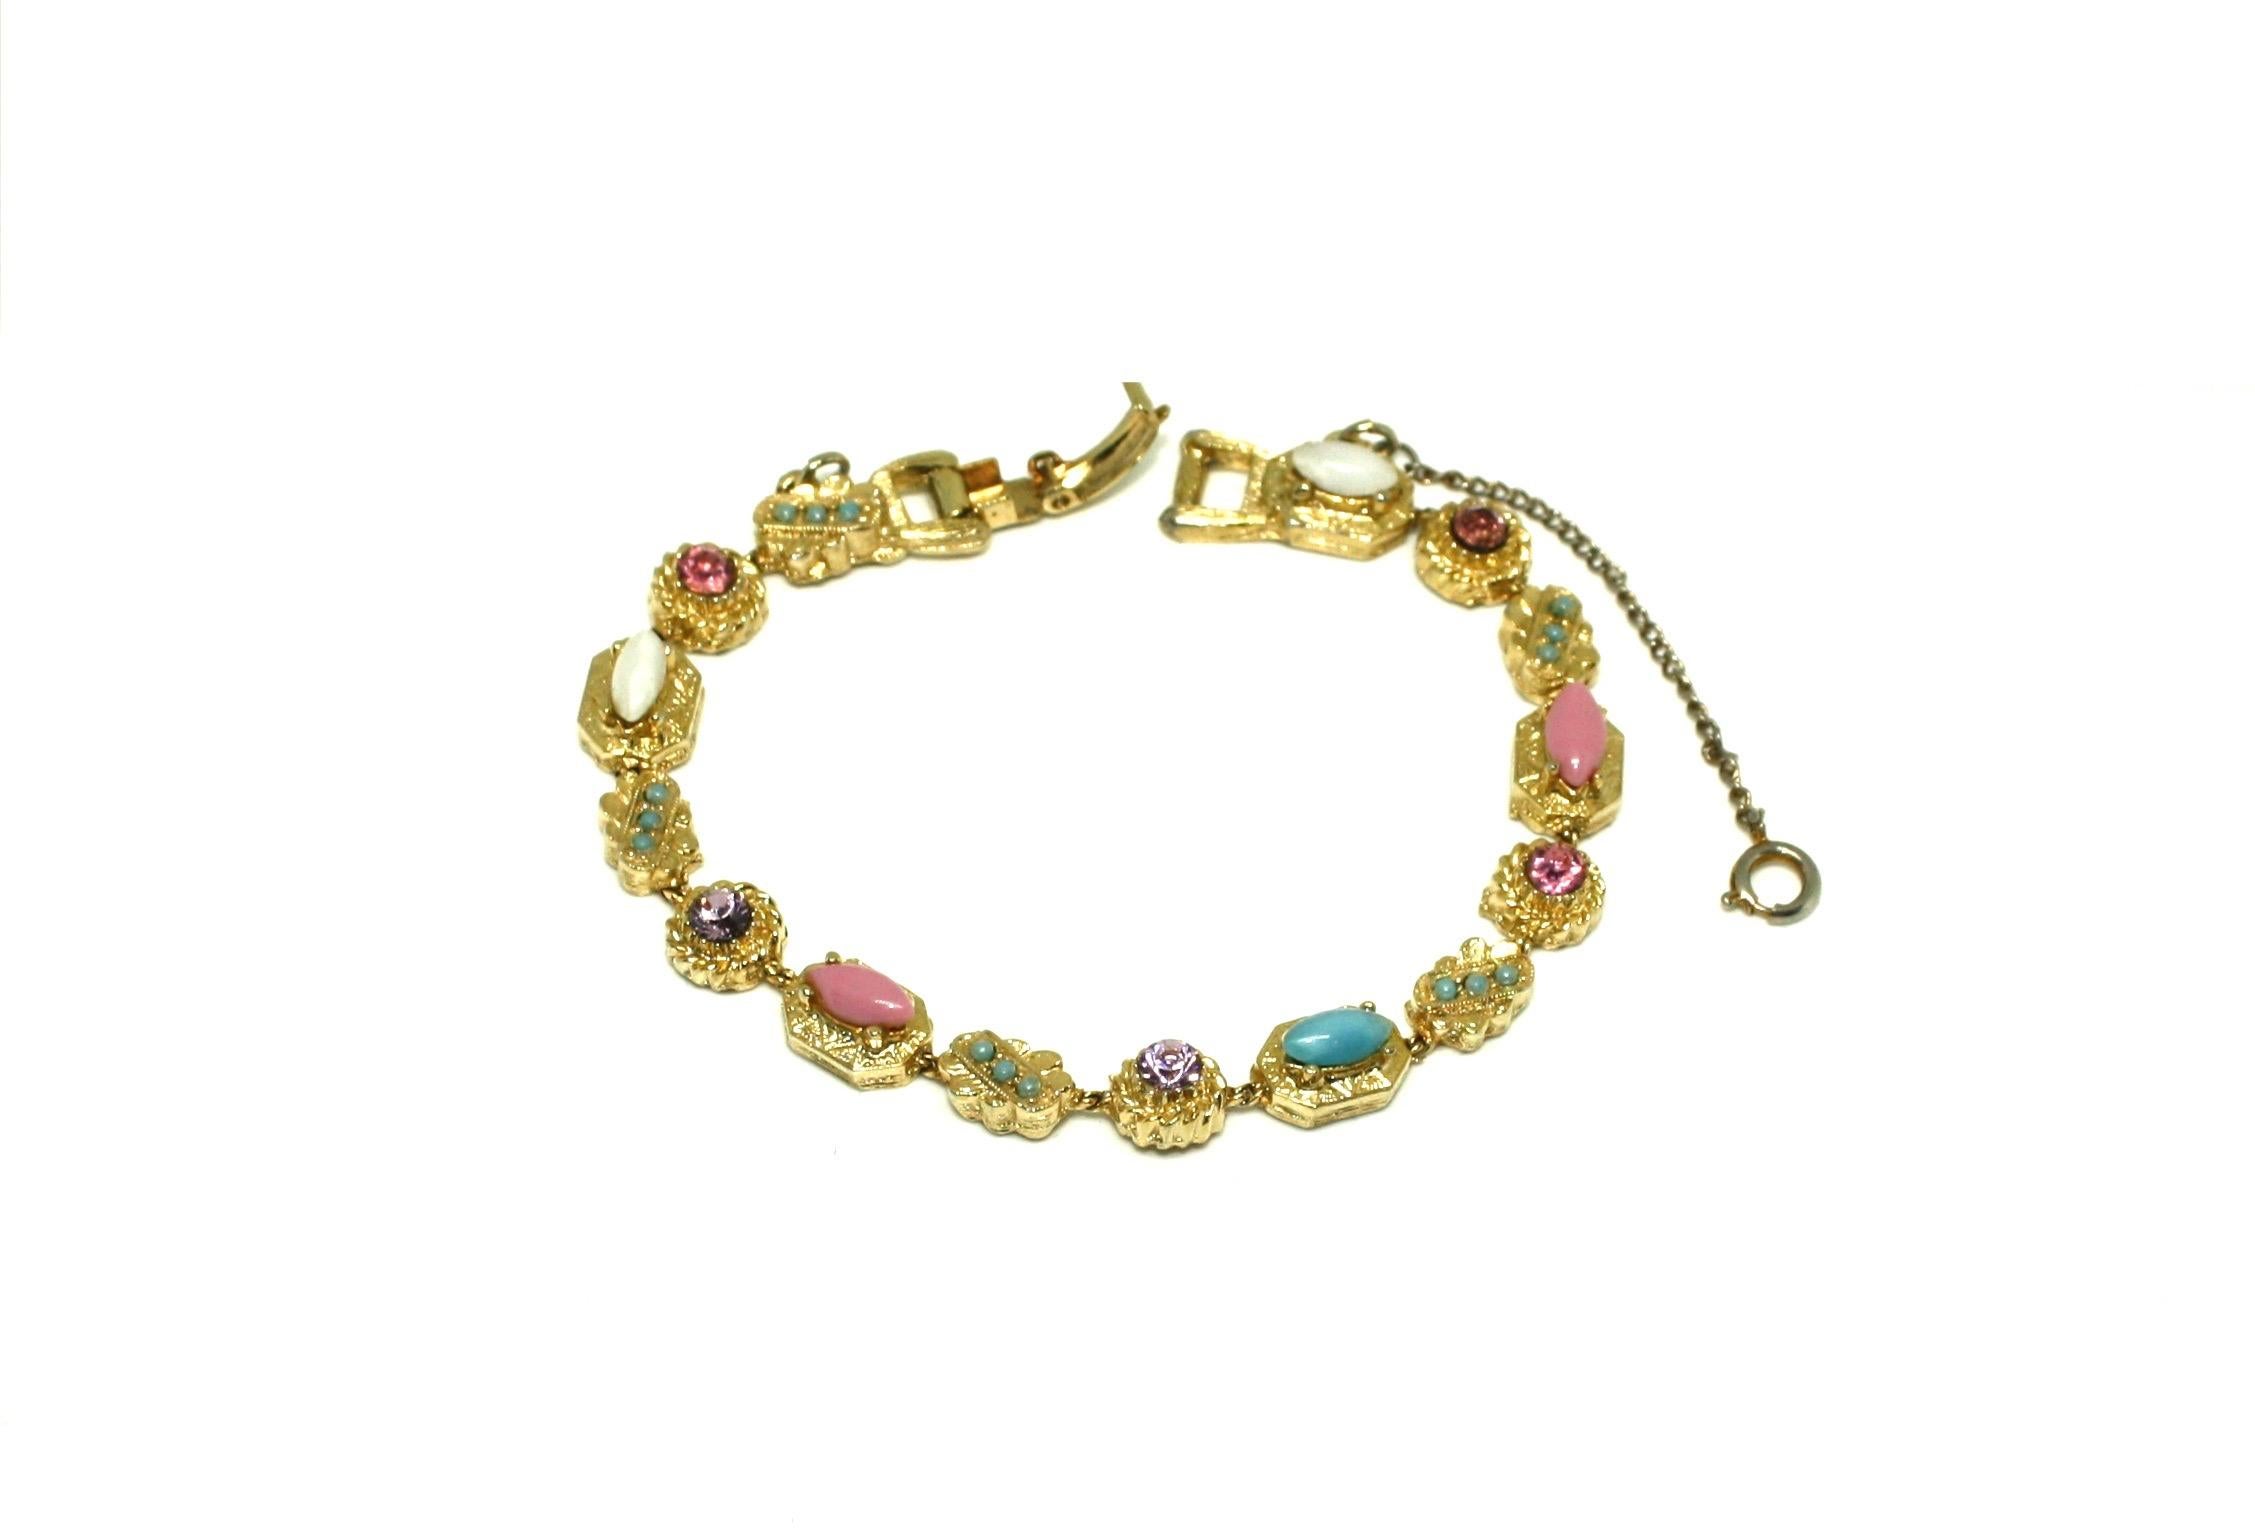 Dated to the 1950's, this delicate link bracelet is extremely detailed. Featuring pretty pastel coloured stones in lilac, pink, white and turquoise set into detailed gilt plated base metal links. The bracelet features a fold-over clasp with the ART